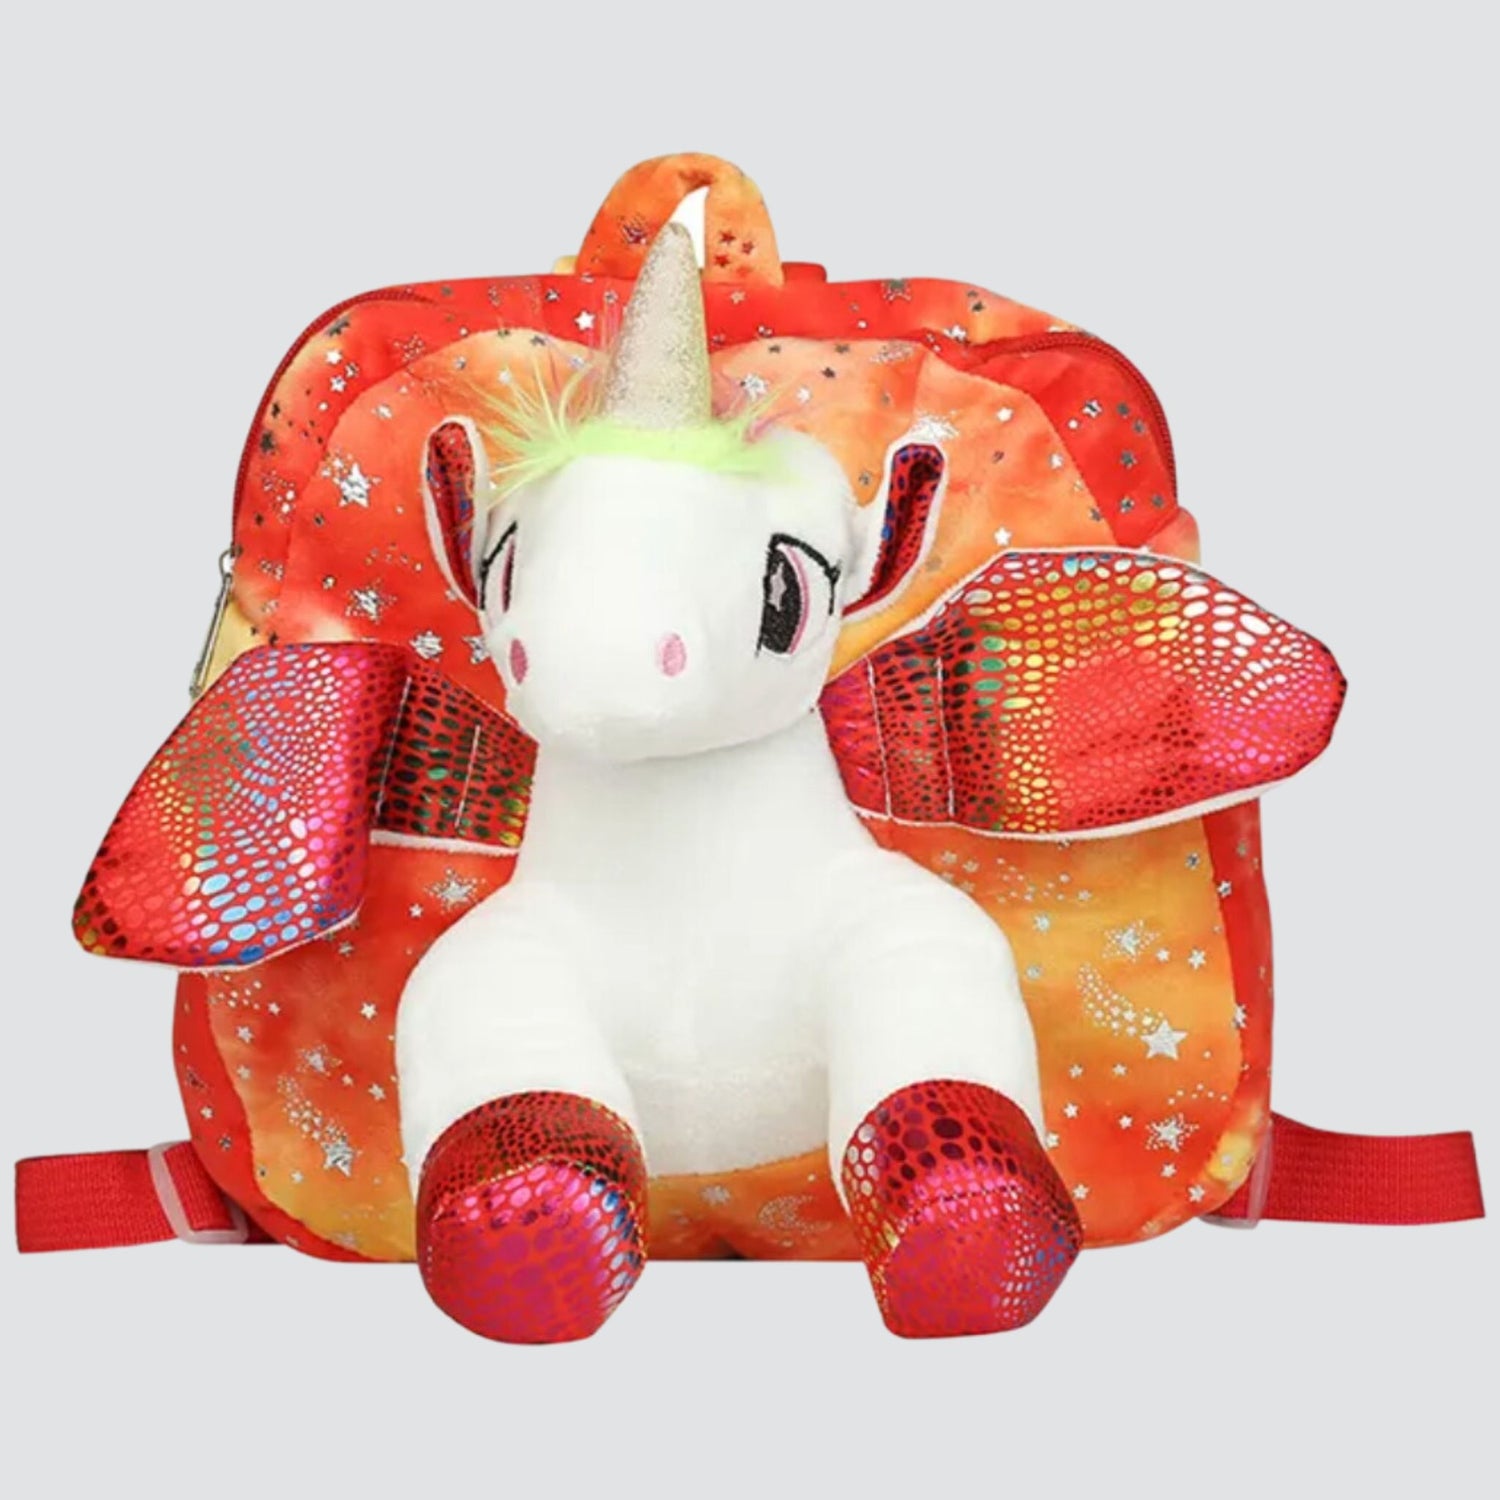 Red Unicorn Backpack with Silver Star Details.